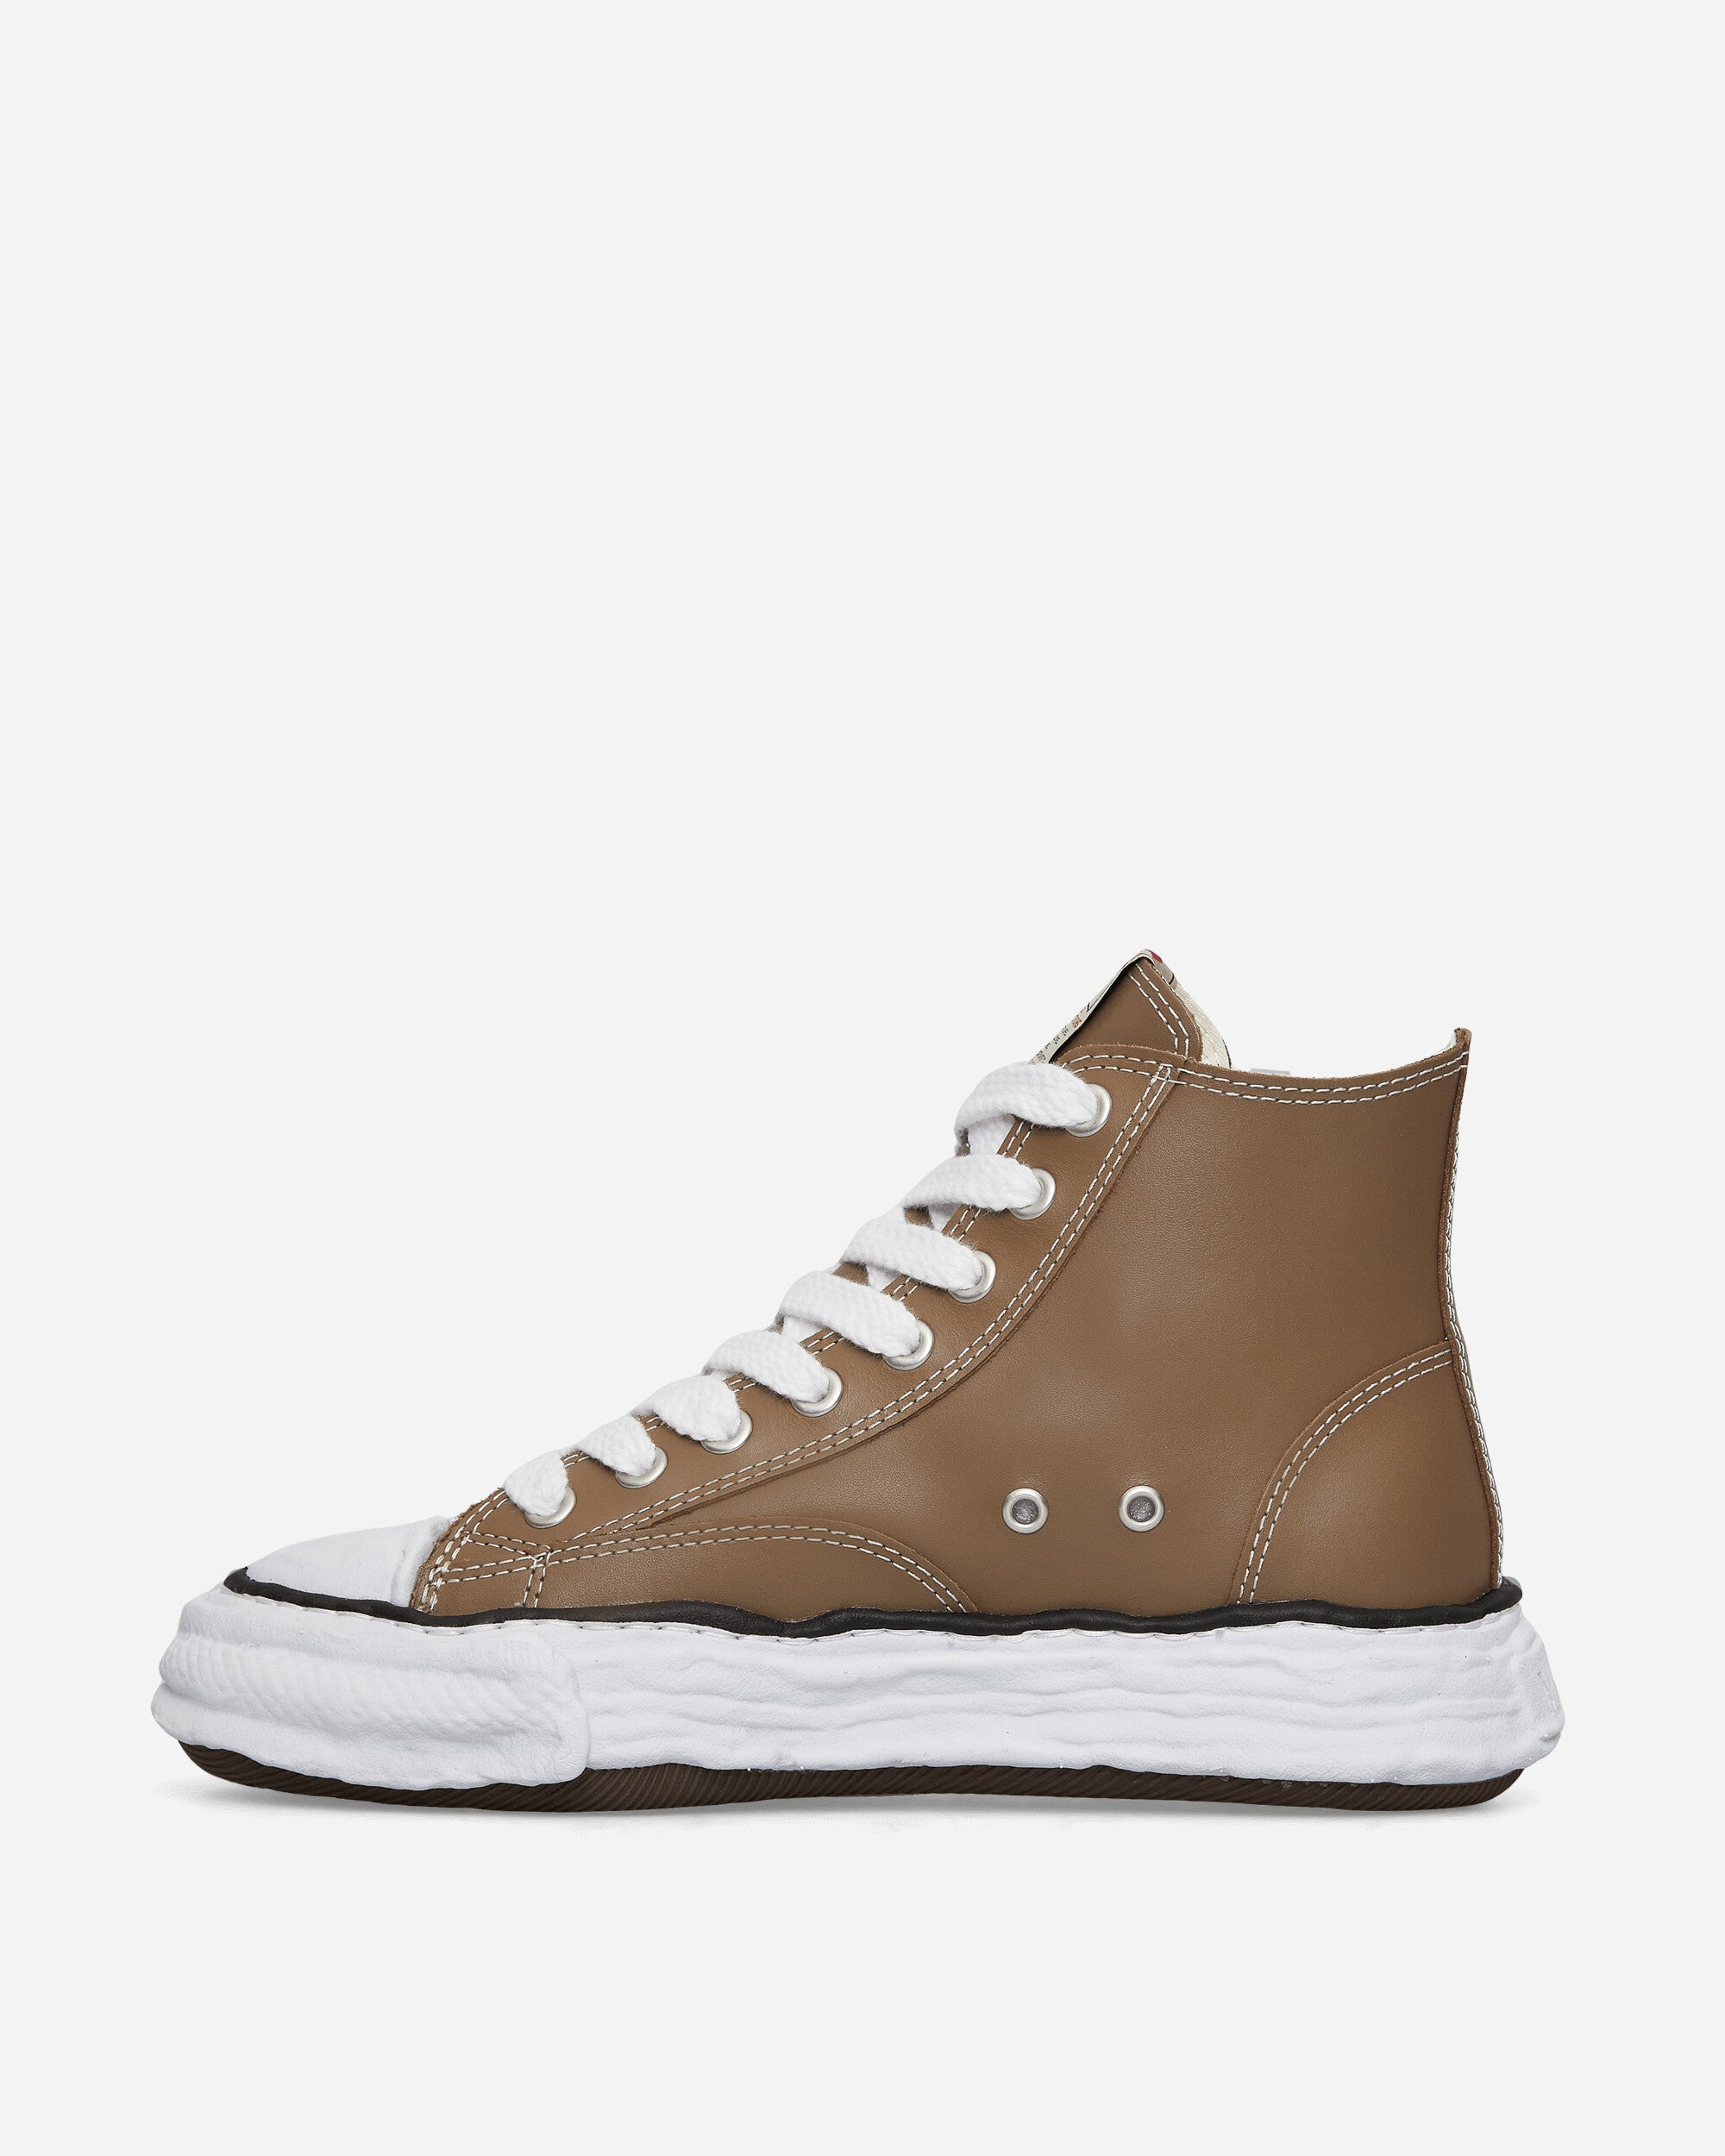 Maison MIHARA YASUHIRO Peterson 23 High/ Original Sole Leather Brown Sneakers High A11FW703 WHITE